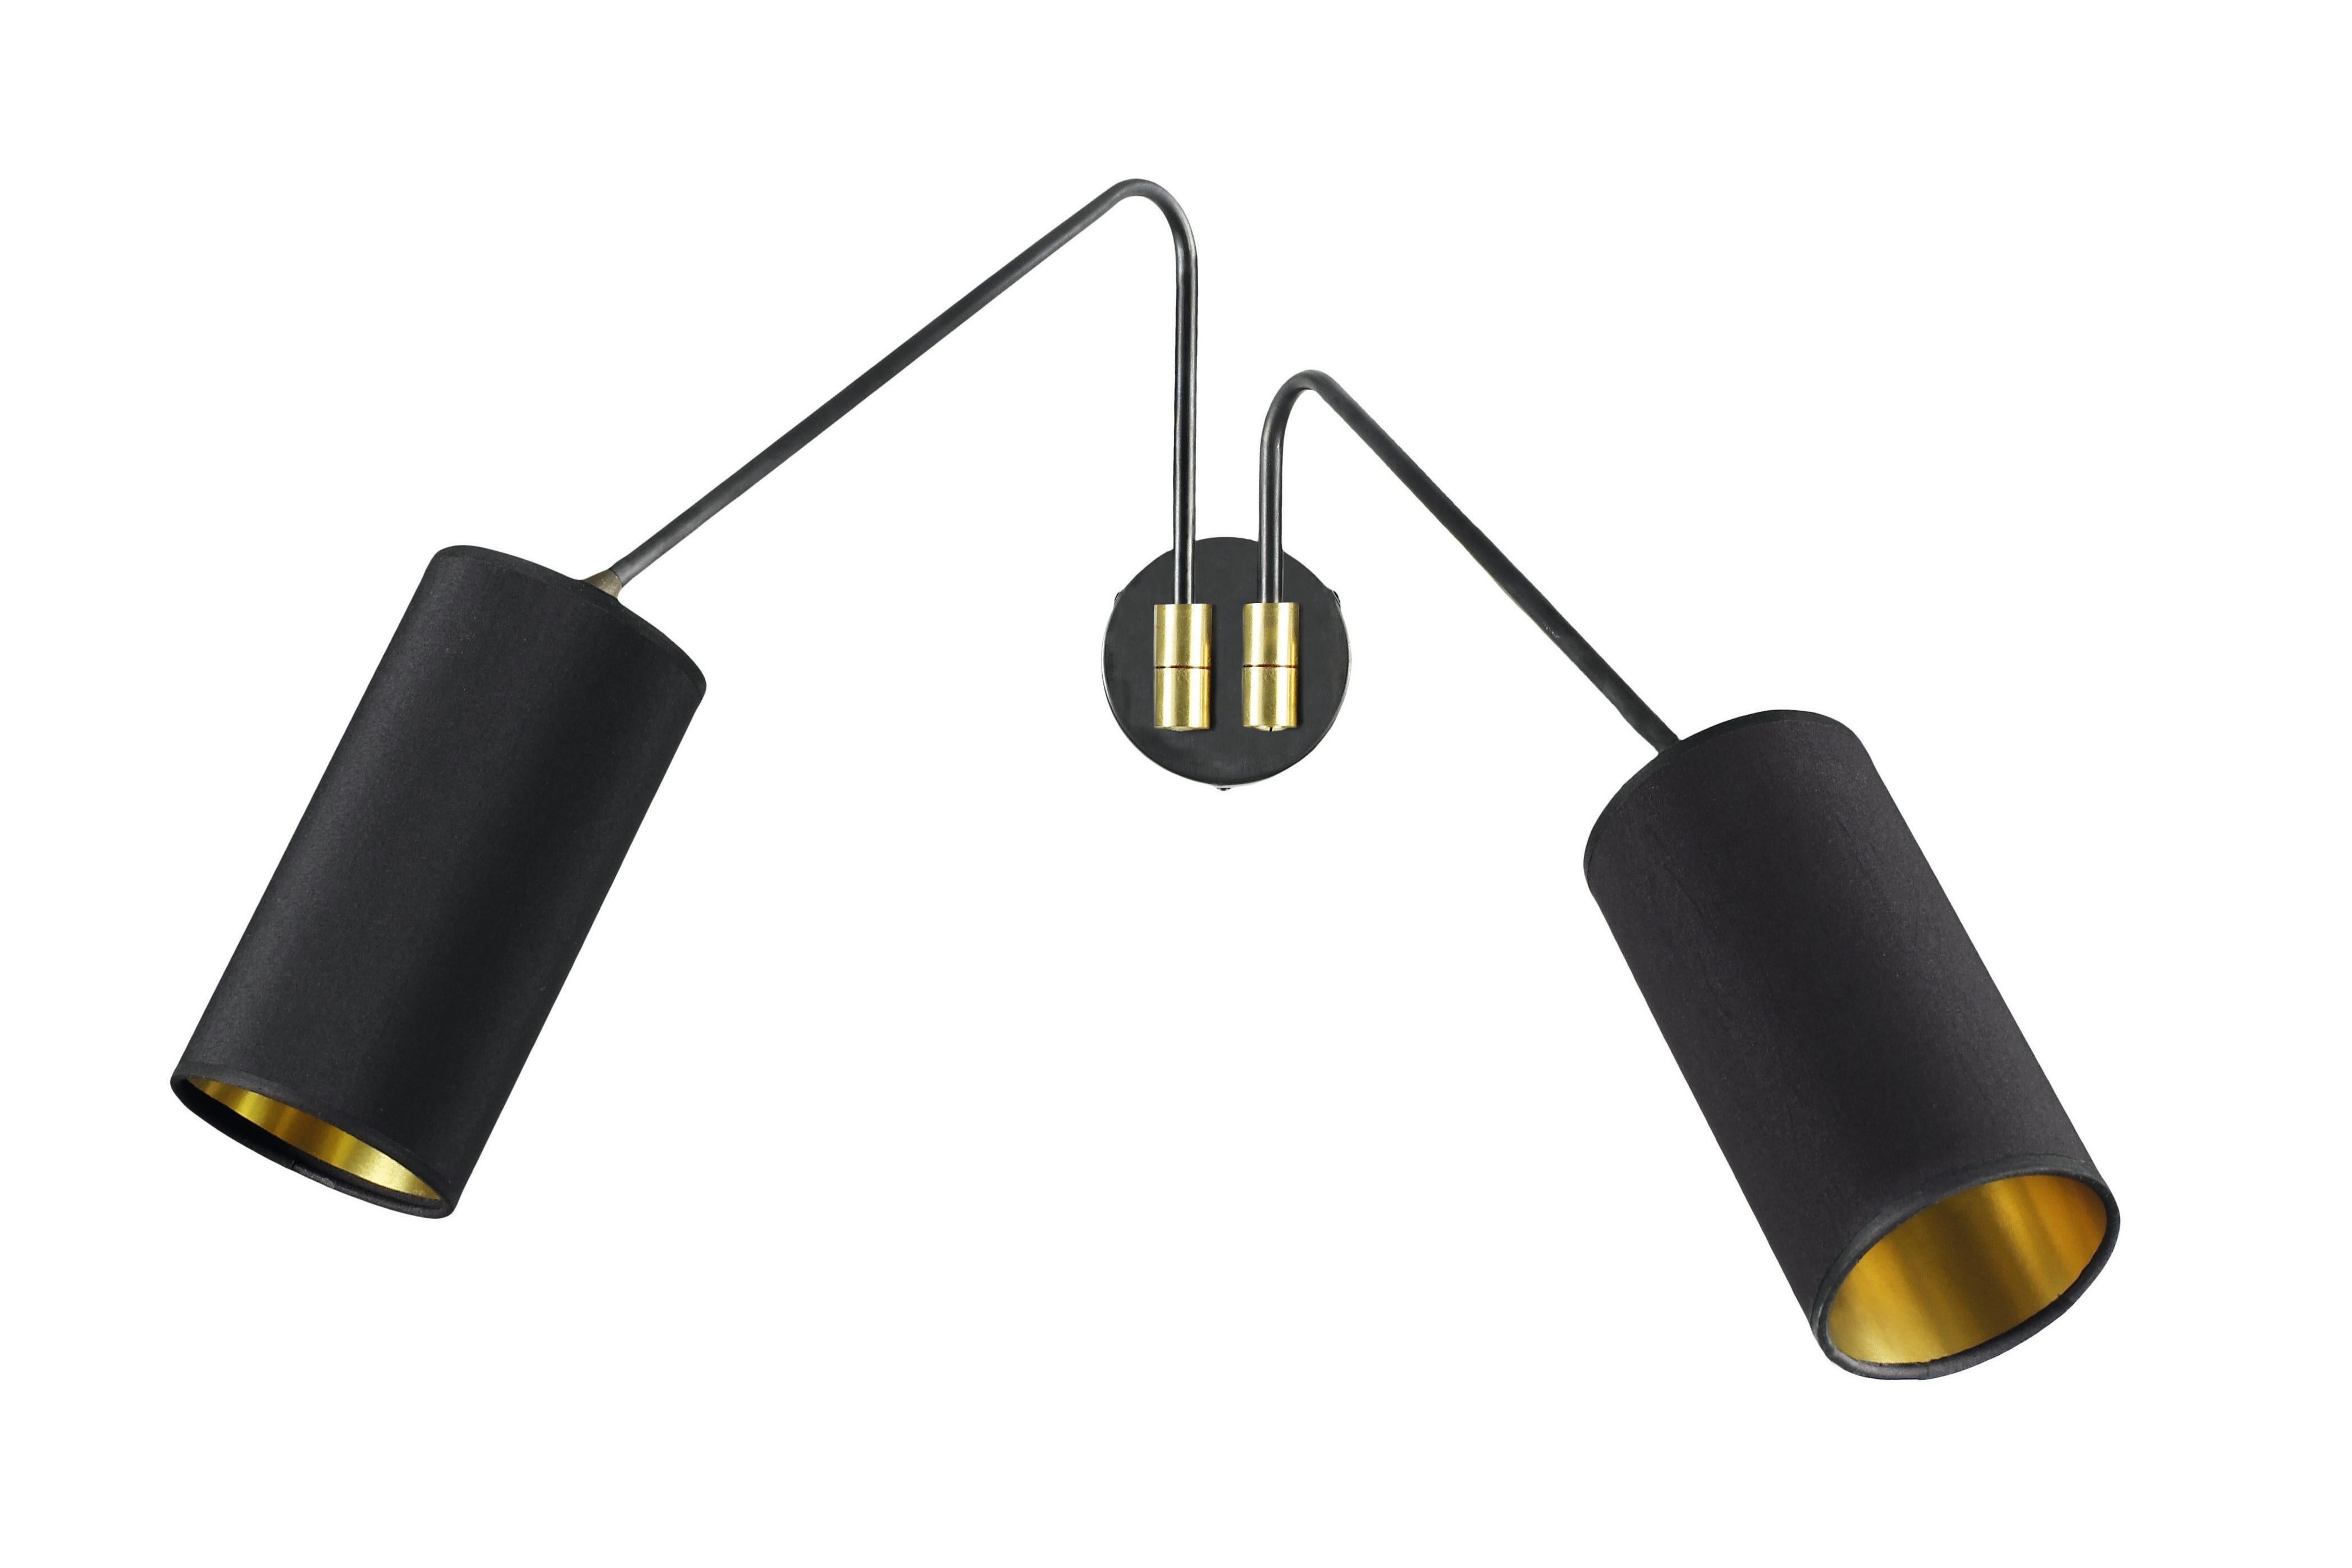 Array twin cotton wall light by CTO Lighting
Materials: Bronze with satin brass details, Black cotton shades/gold lining
Dimensions: 90 x 40 cm

All our lamps can be wired according to each country. If sold to the USA it will be wired for the USA